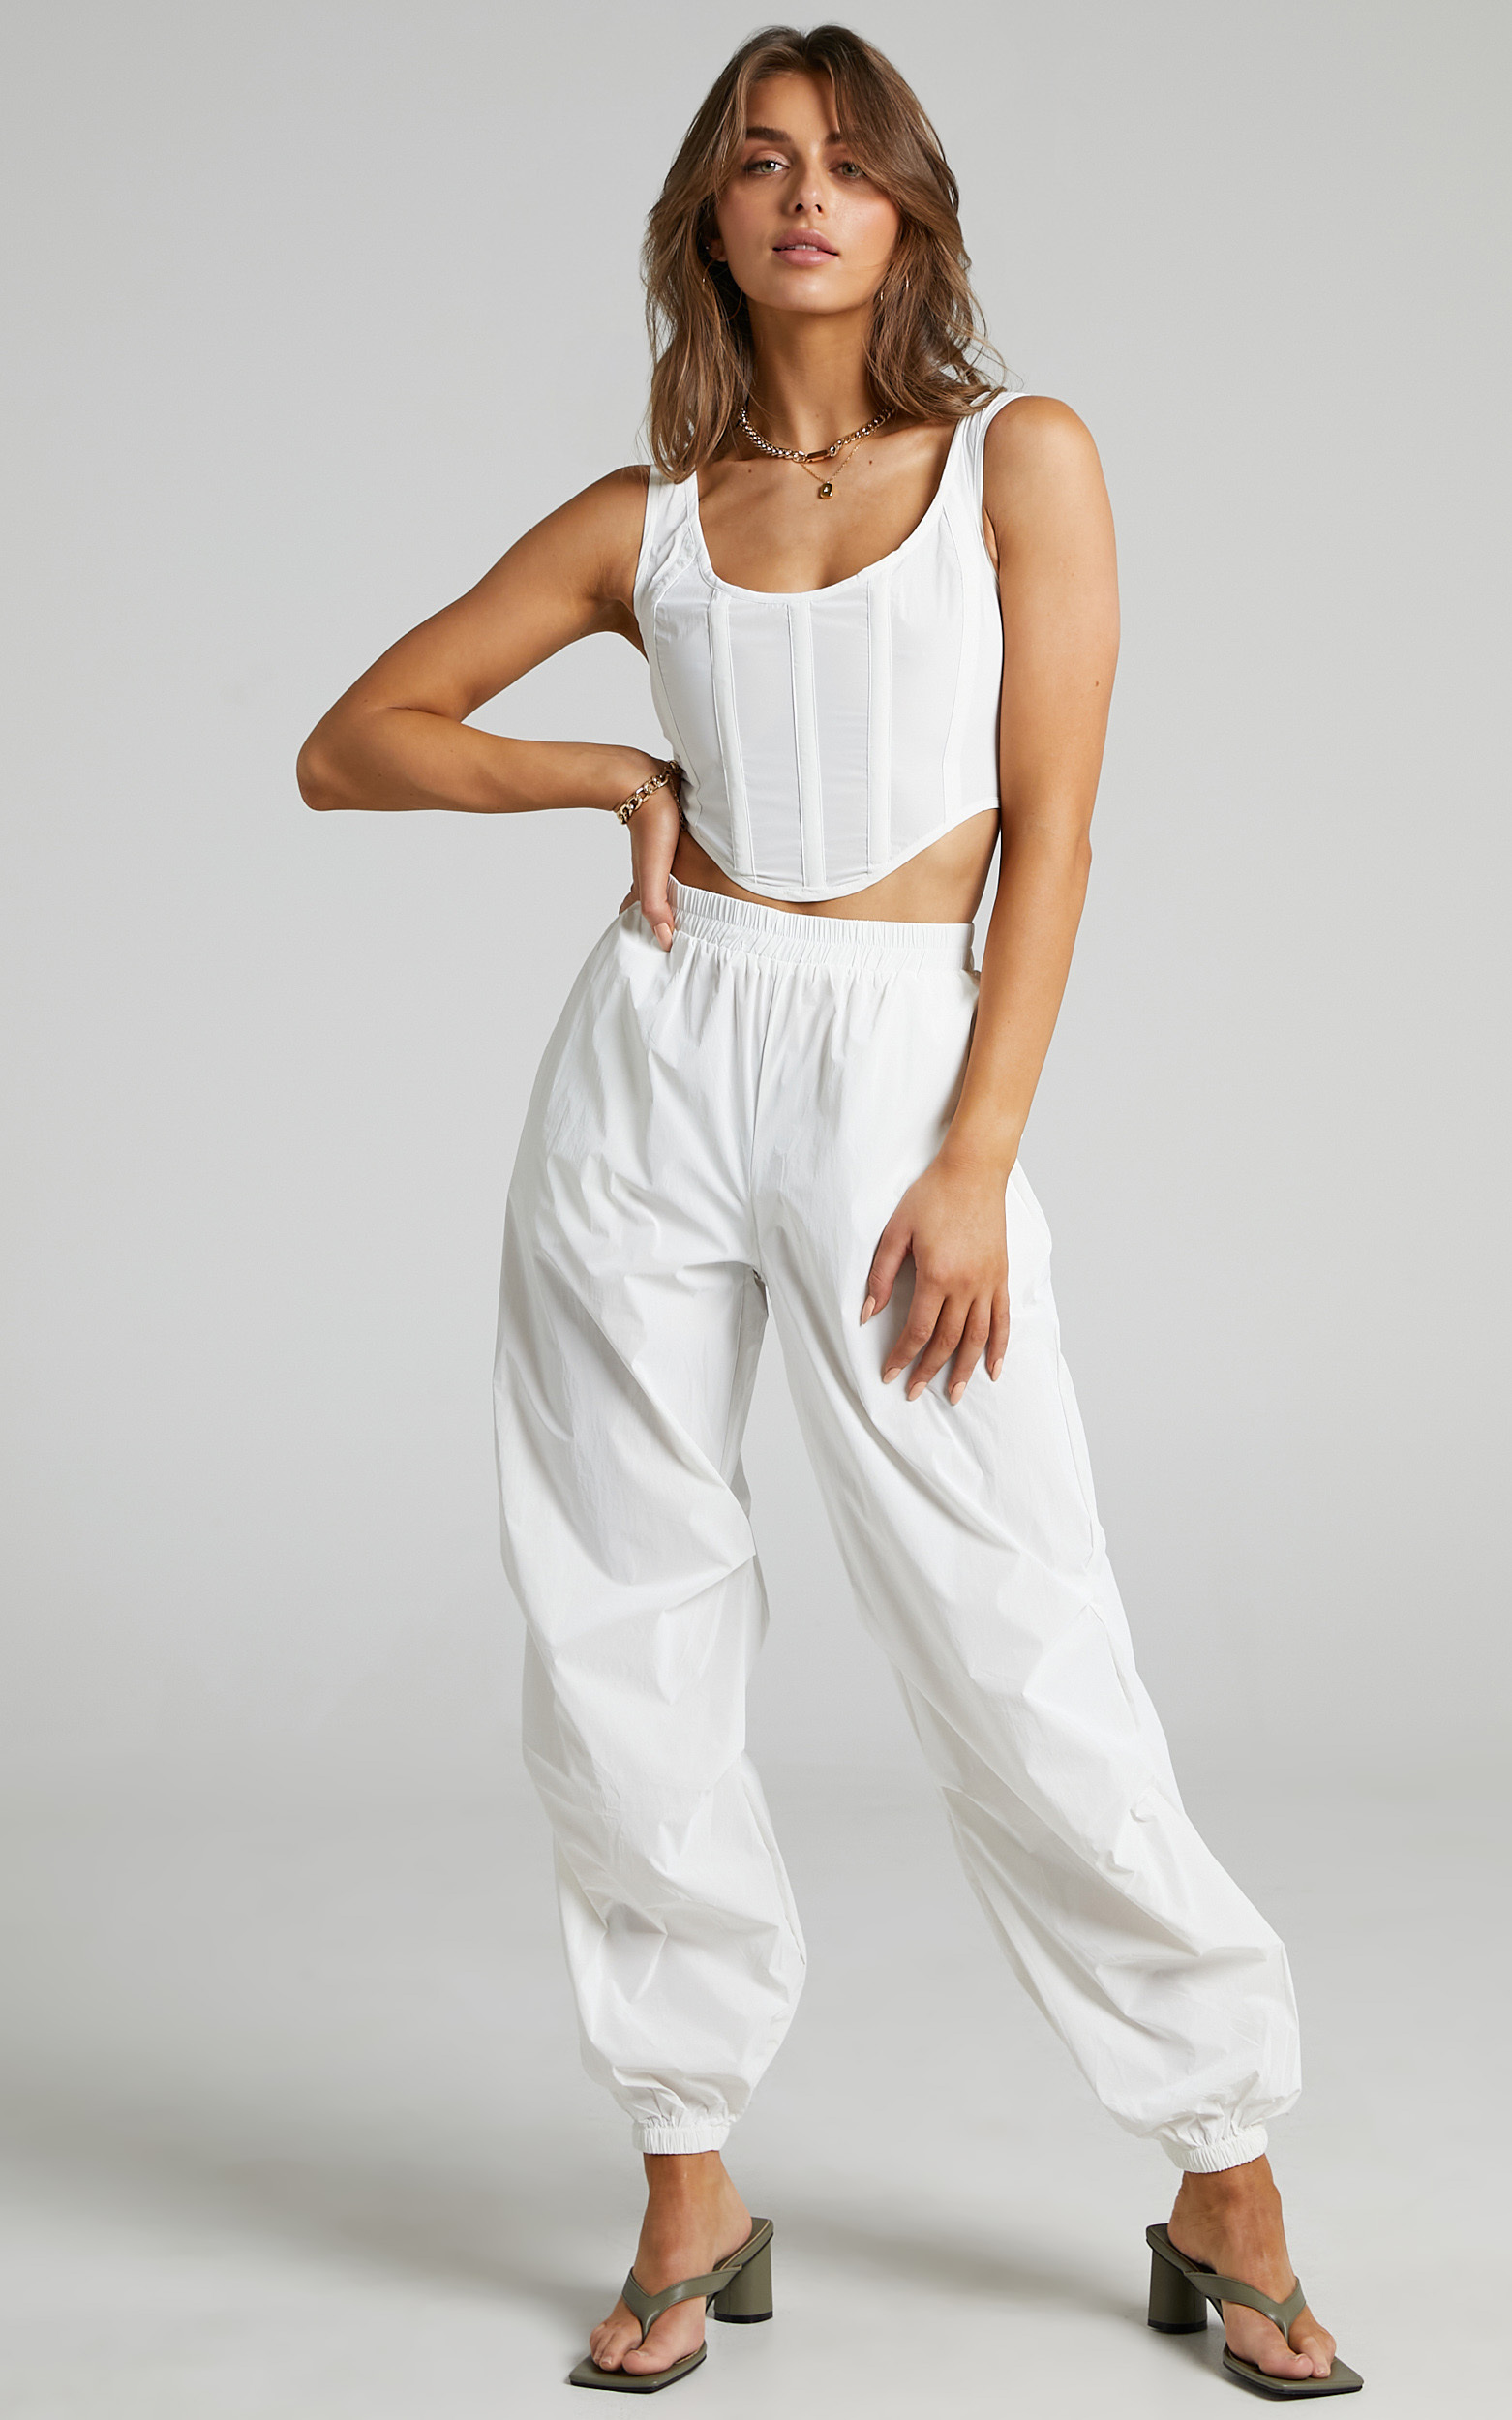 BY DYLN - Franco Pants in White - L, WHT2, hi-res image number null